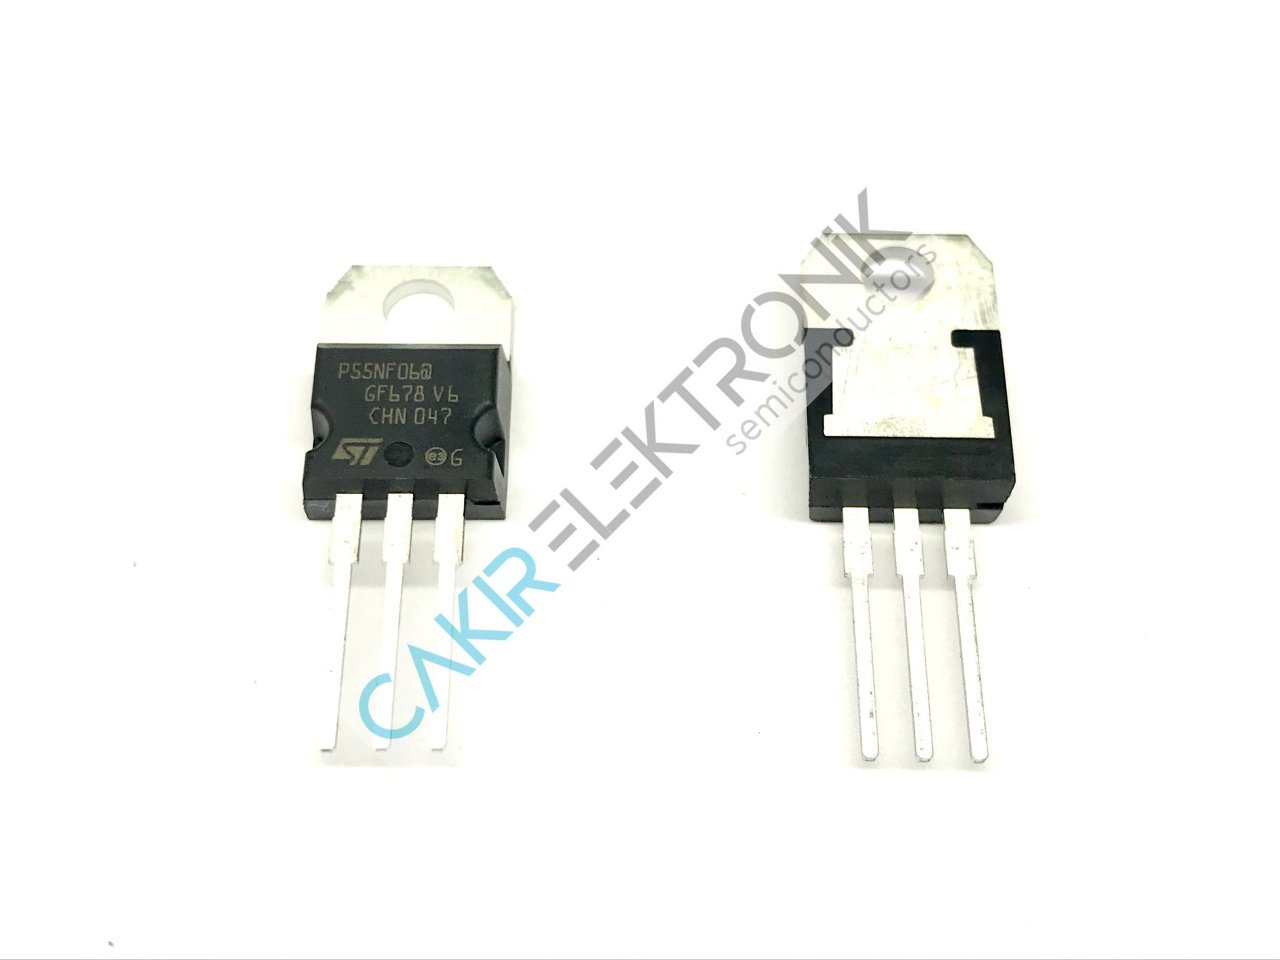 STP55NF06 -  P55NF06 - 55NF60   N-channel 60 V, 0.015 Ohm, 50 A STripFET(TM) II Power MOSFET in TO-220